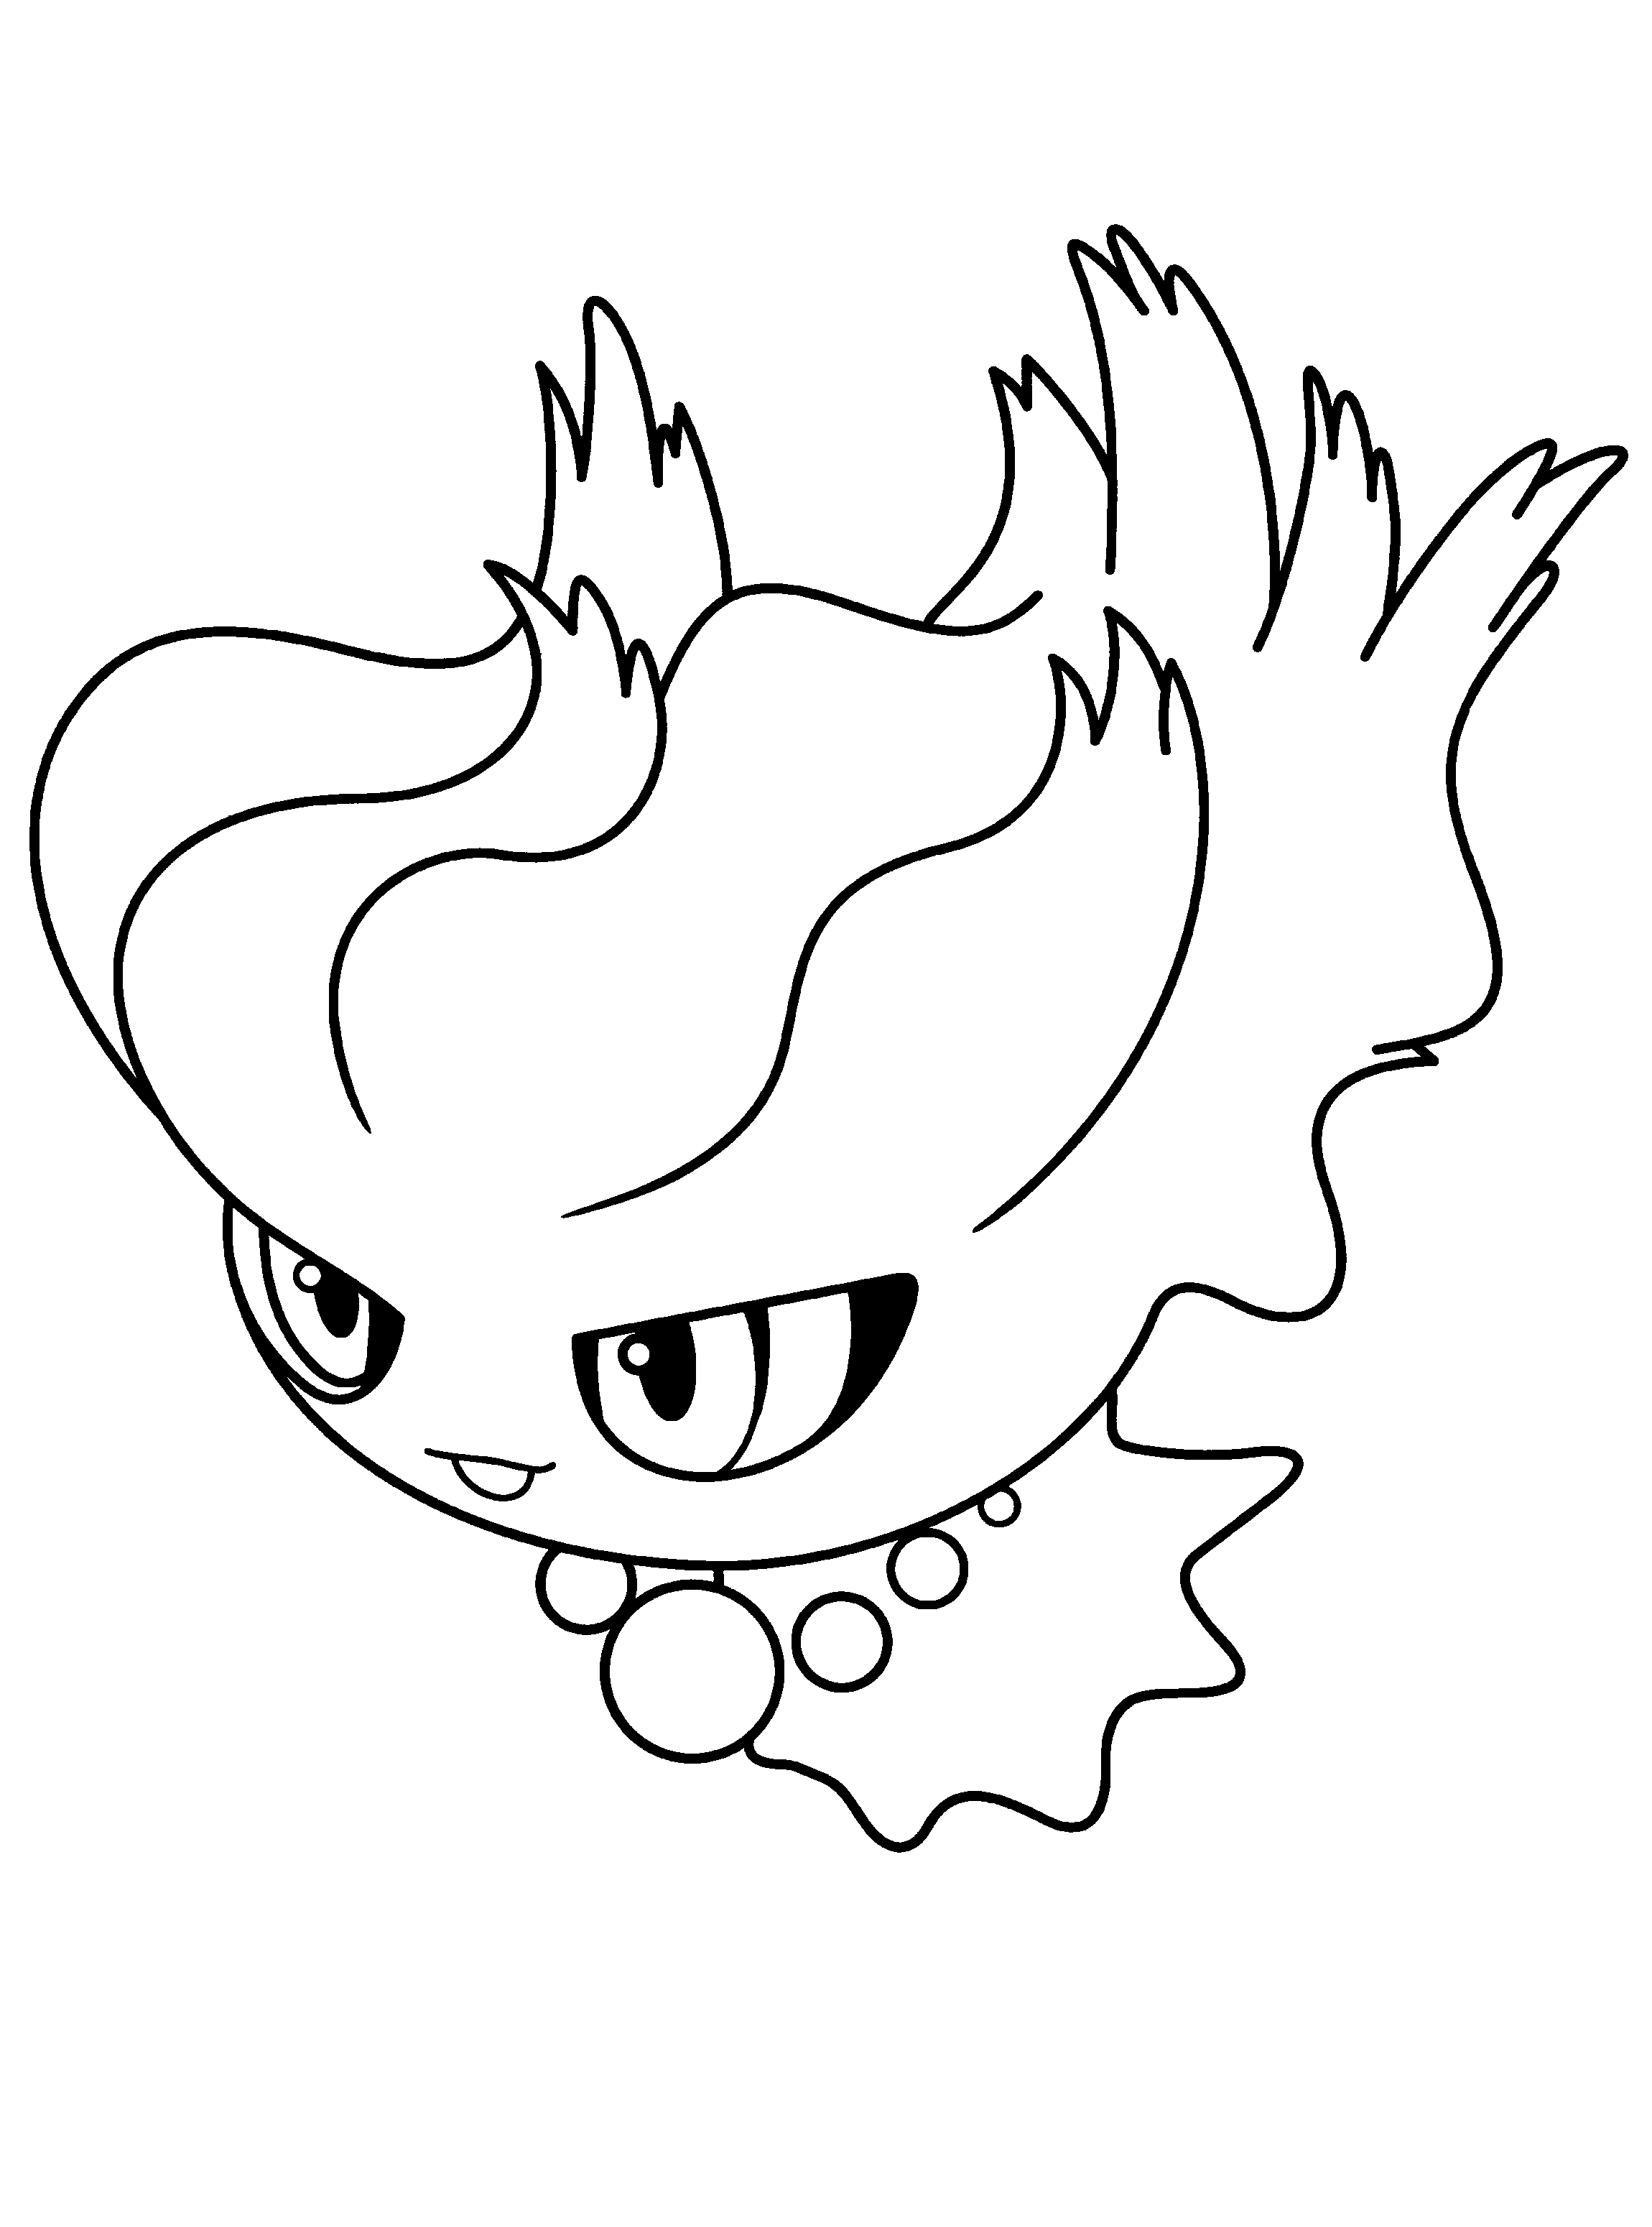 pokmon coloring pages pokemon coloring pages download pokemon images and print coloring pages pokmon 